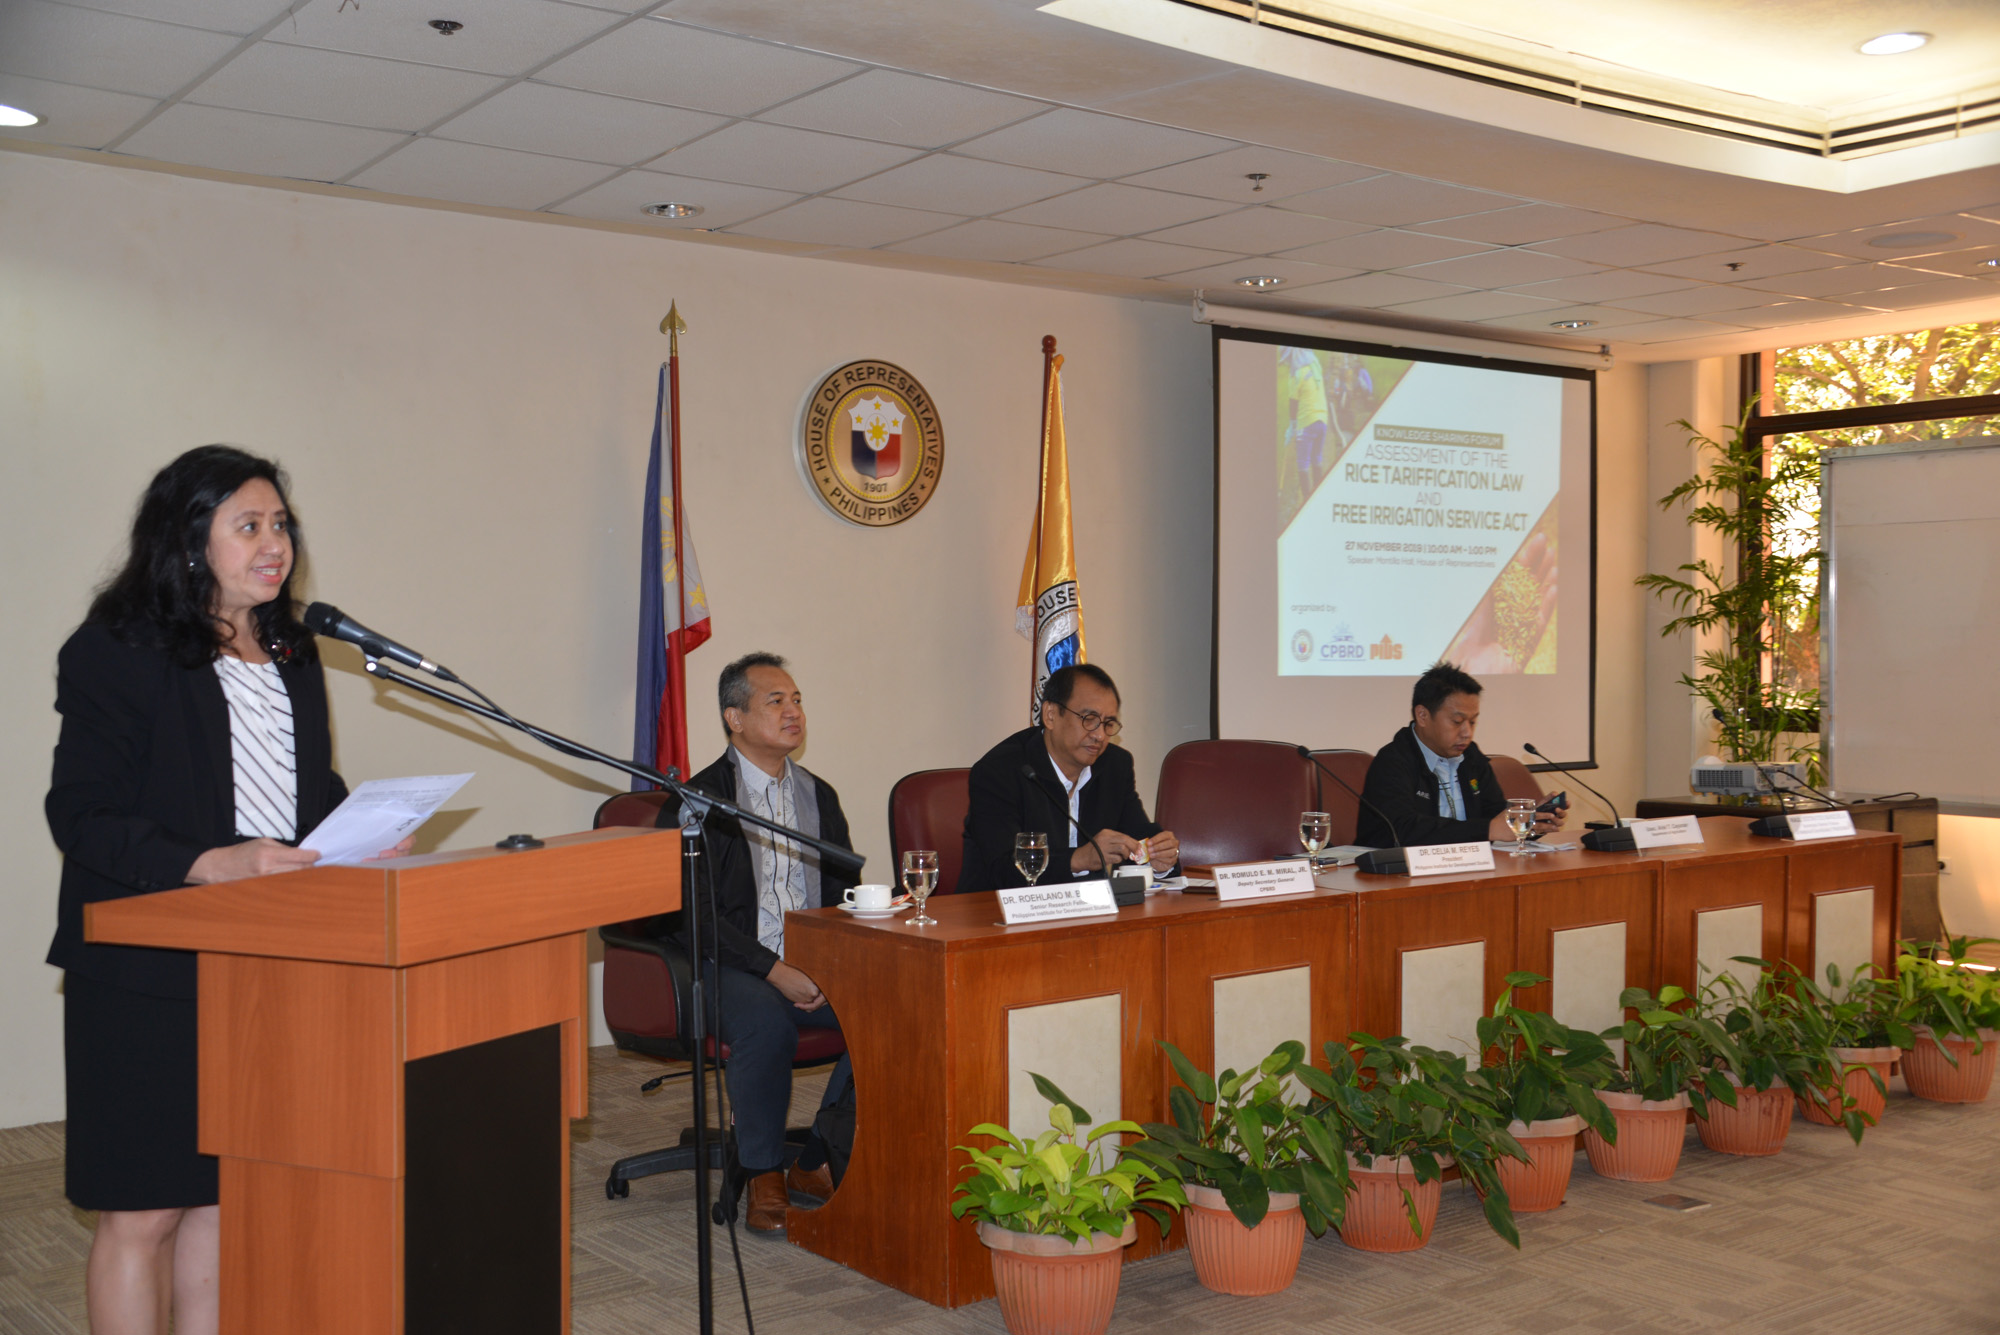 PIDS-CPBRD Knowledge Sharing Forum on the Assessment of the Rice Tariffication Law (RA 11203) and Free Irrigation Service Act (RA 10969)-pids-cpbrd-4-20191127.jpg